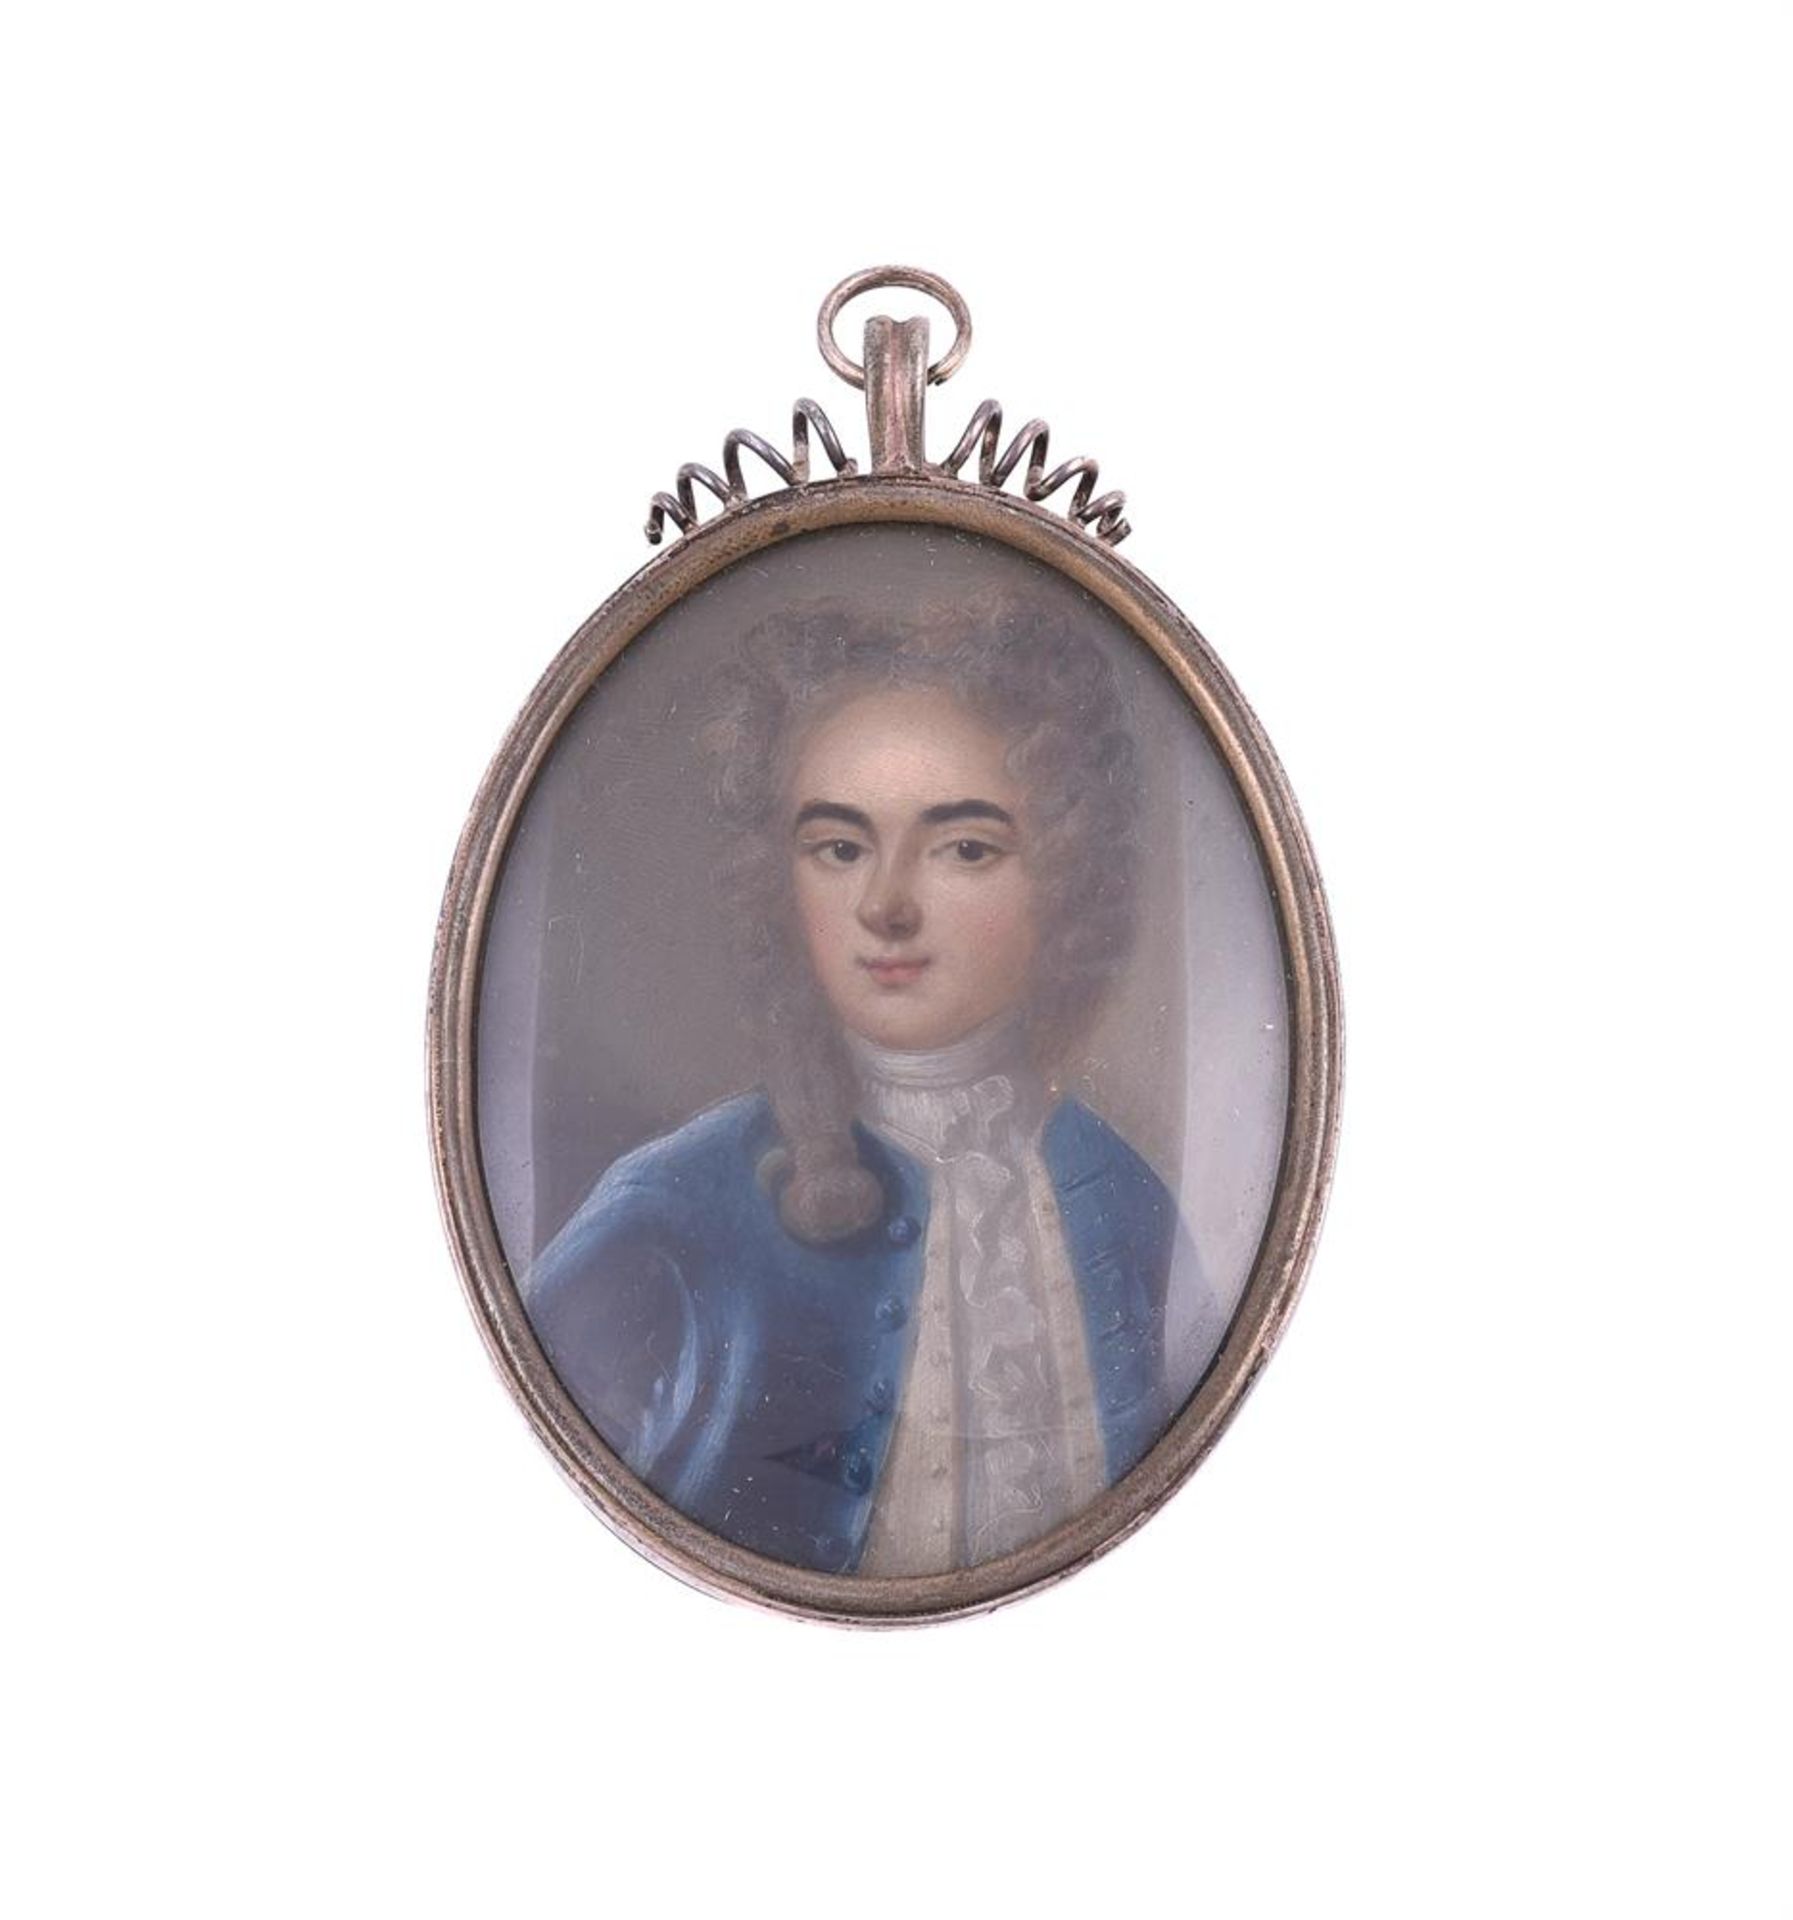 French School (probably 18th century), A gentleman, wearing blue coat